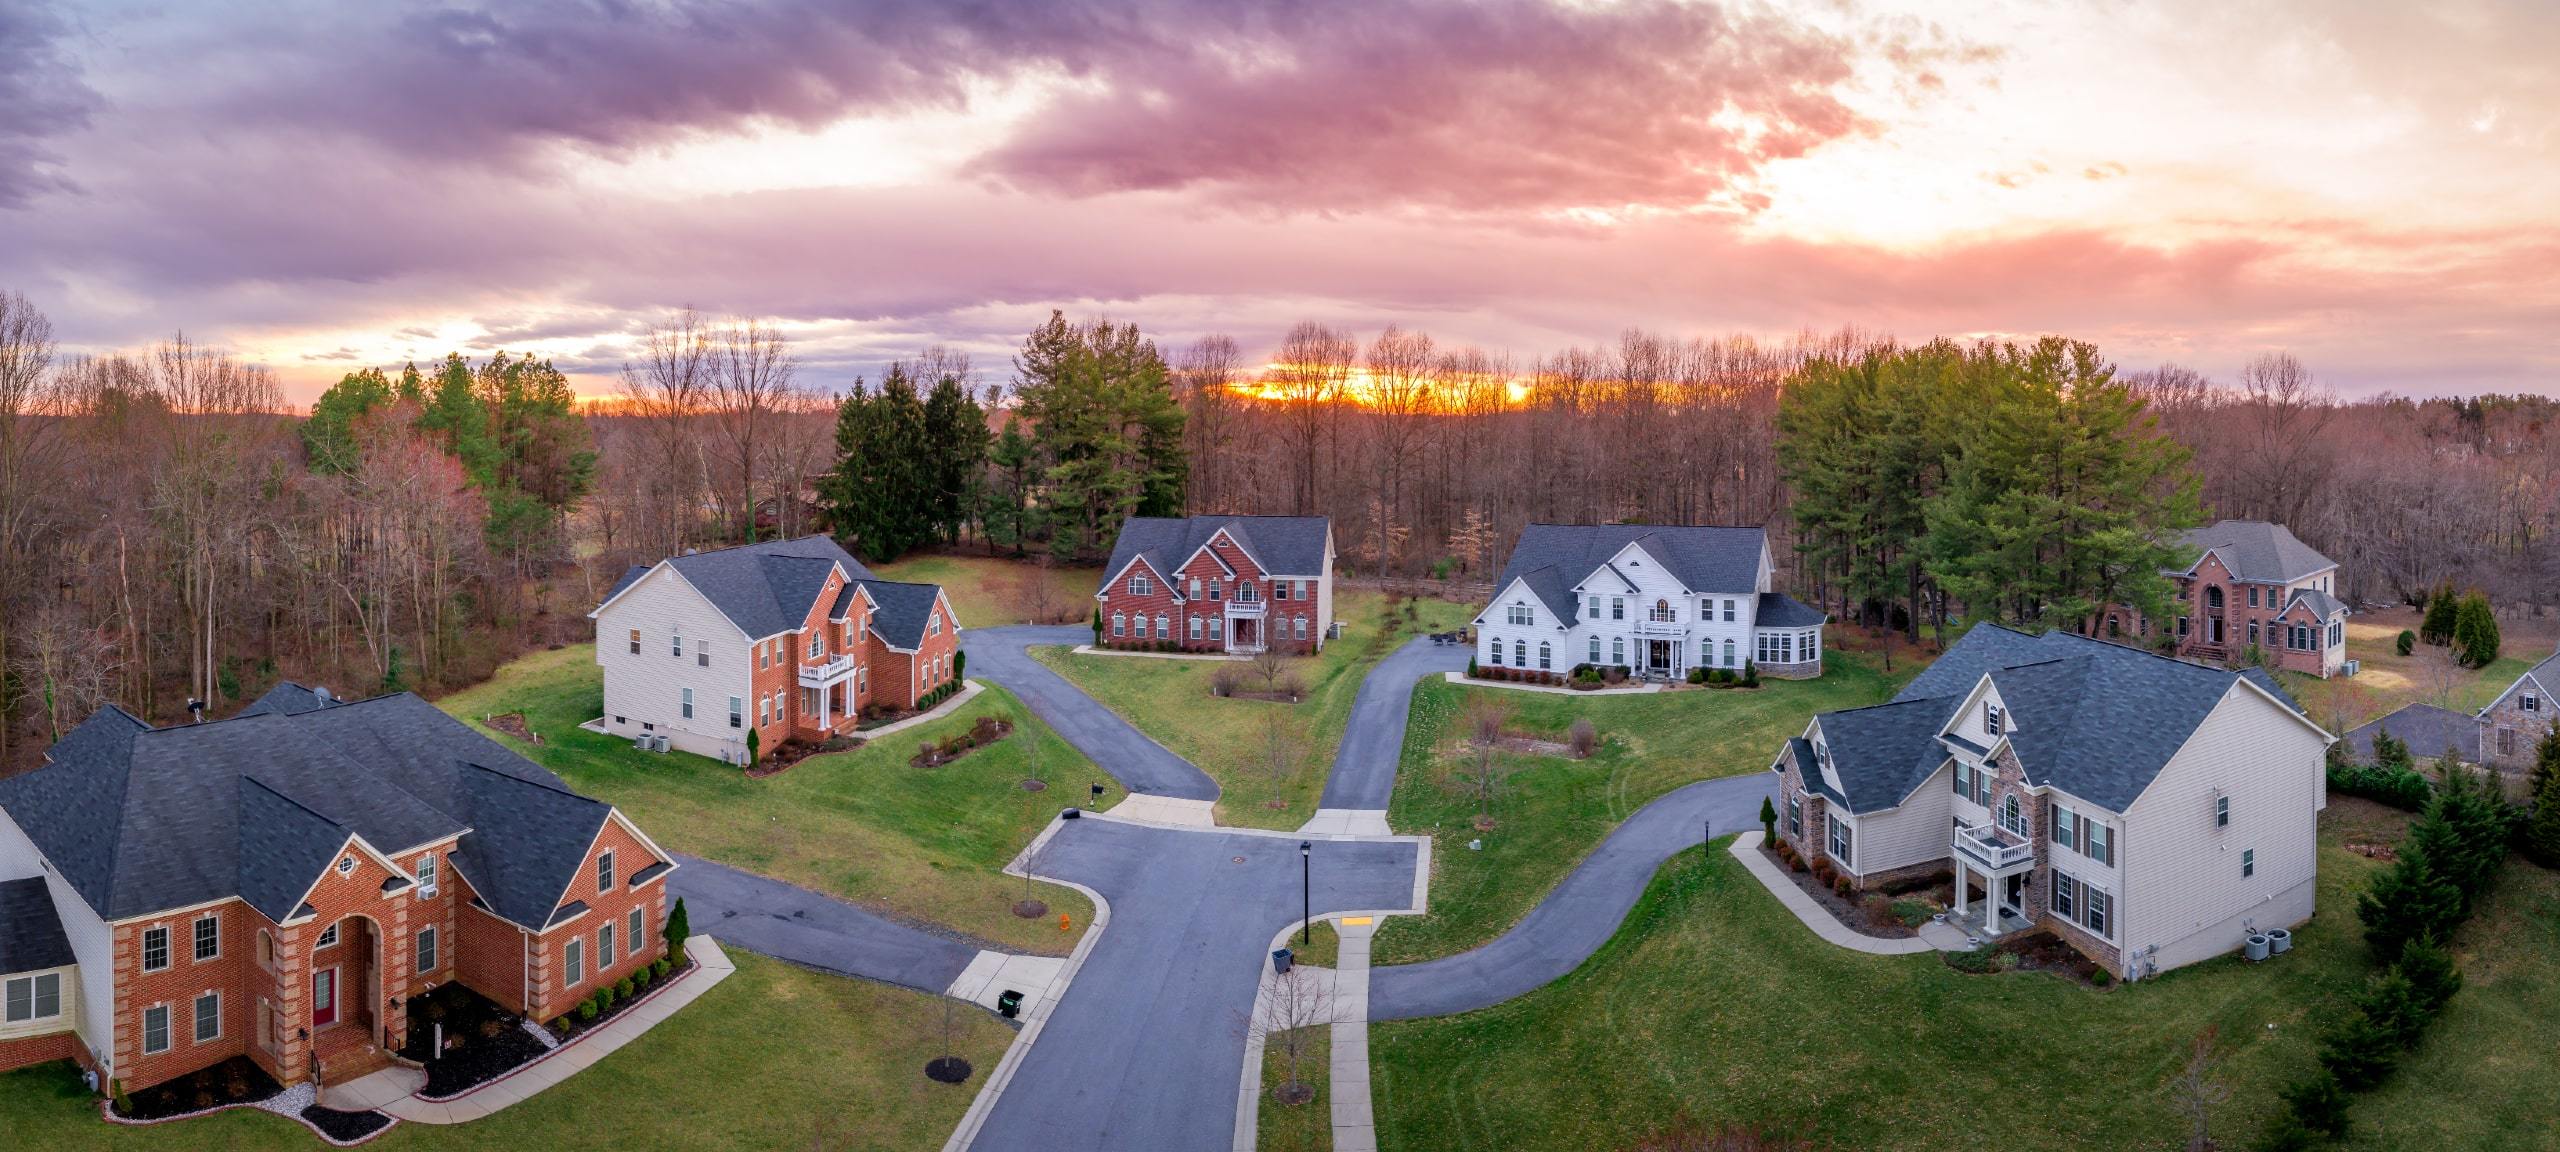 Luxury homes in neighborhood in Clarksville, MD during sunset